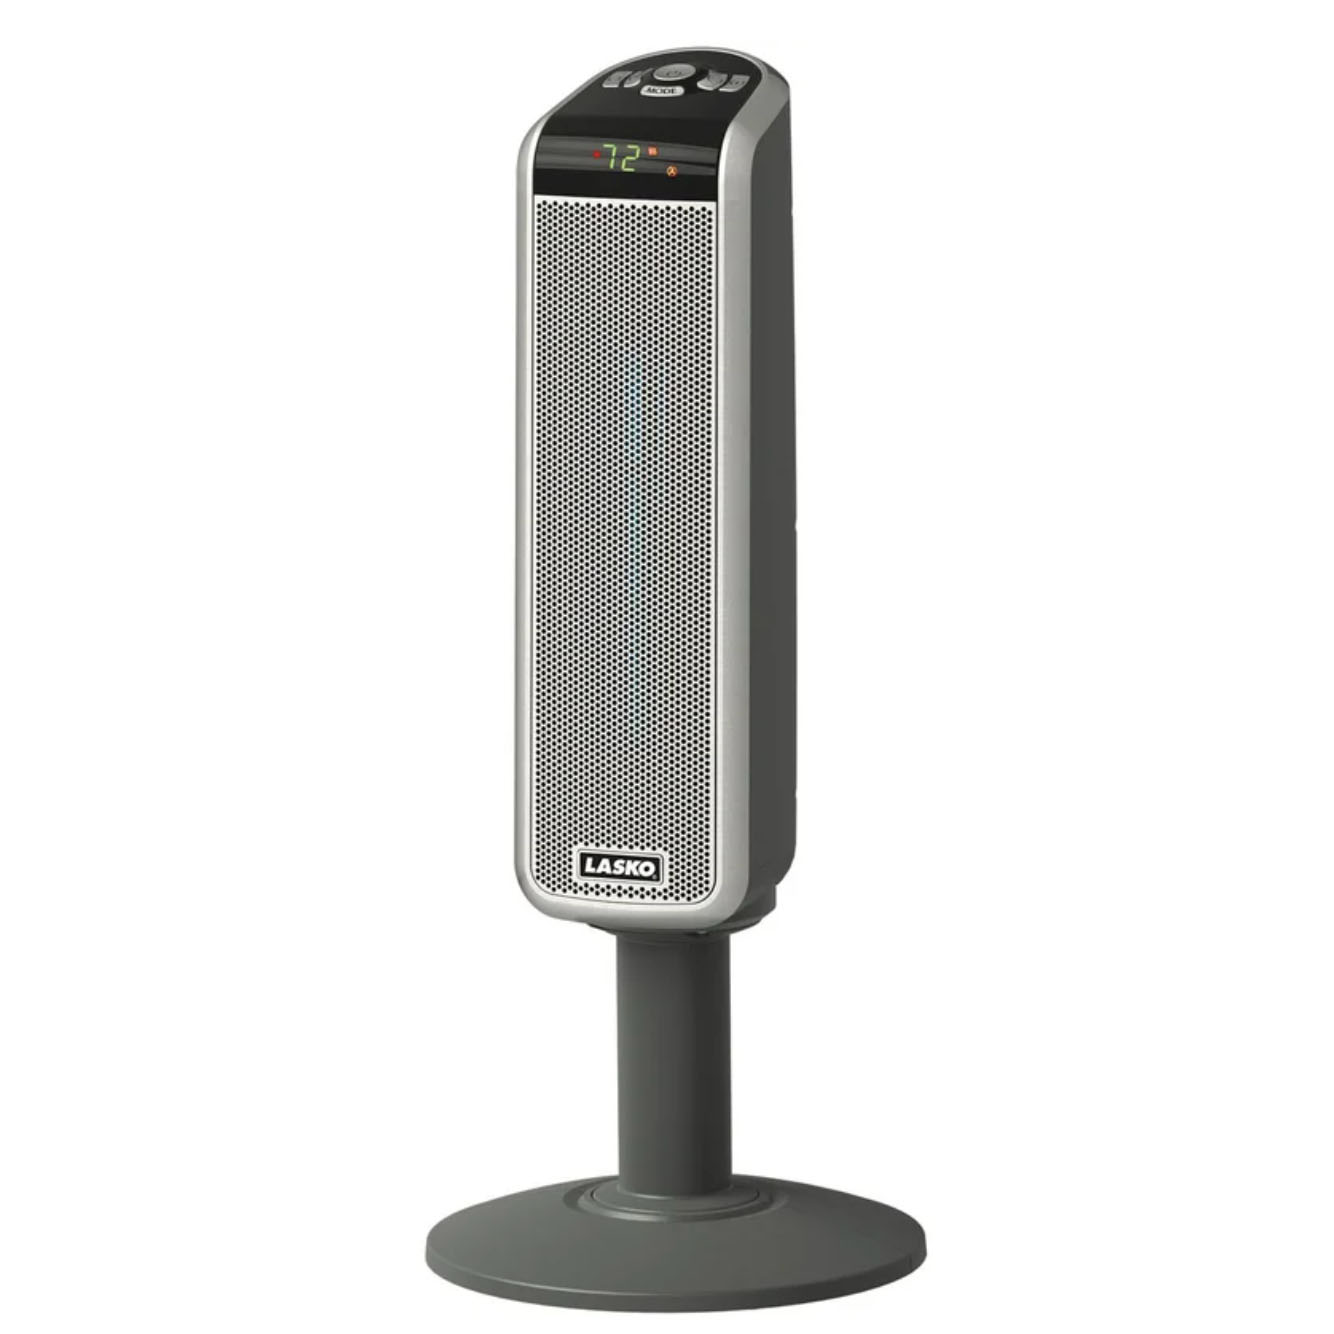 Blue and silver heater on a stand